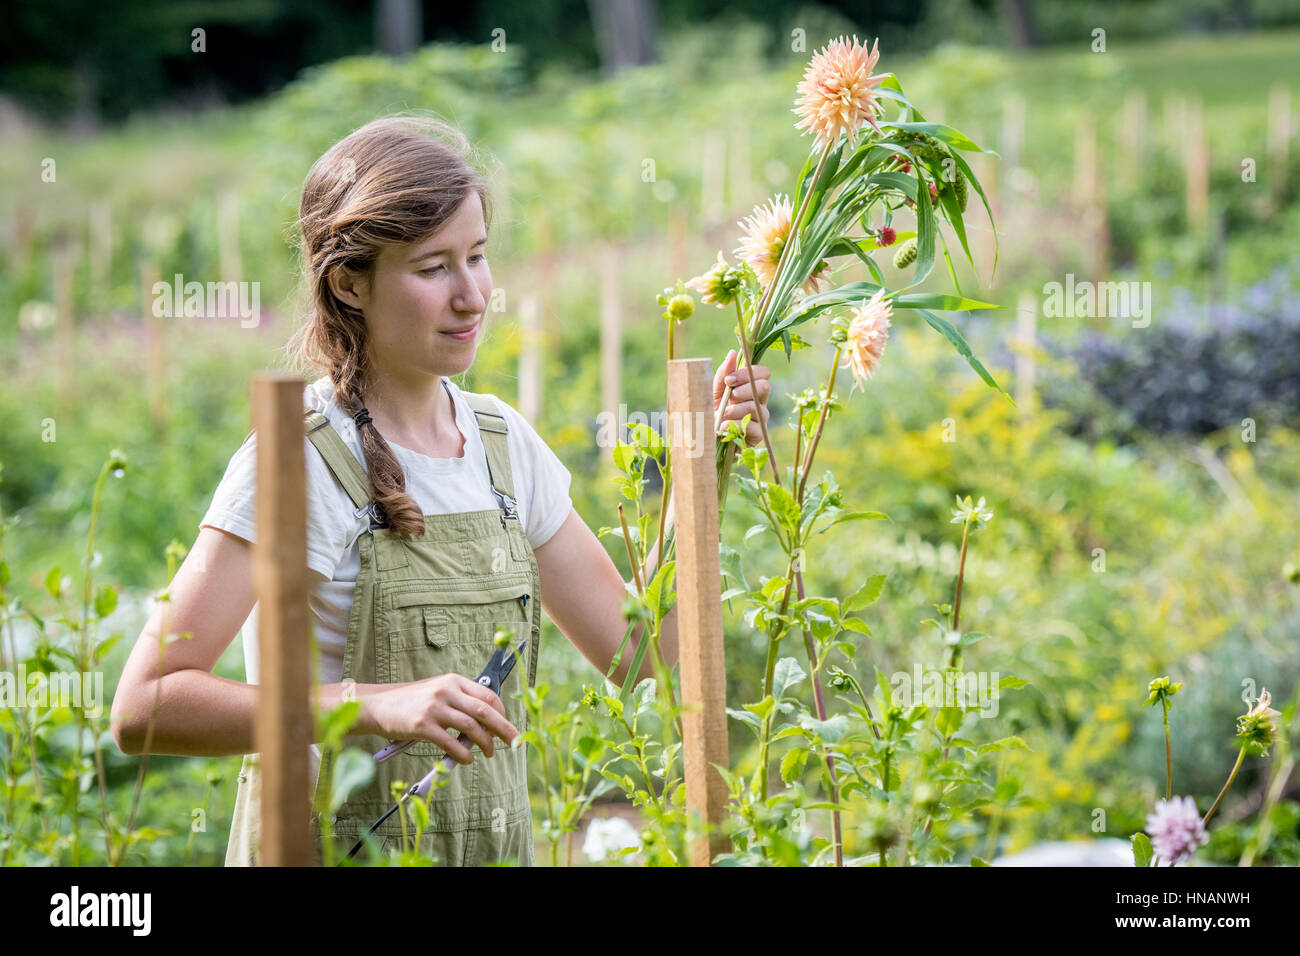 Woman cutting fresh flowers from a garden on a farm in rural Maryland. Stock Photo